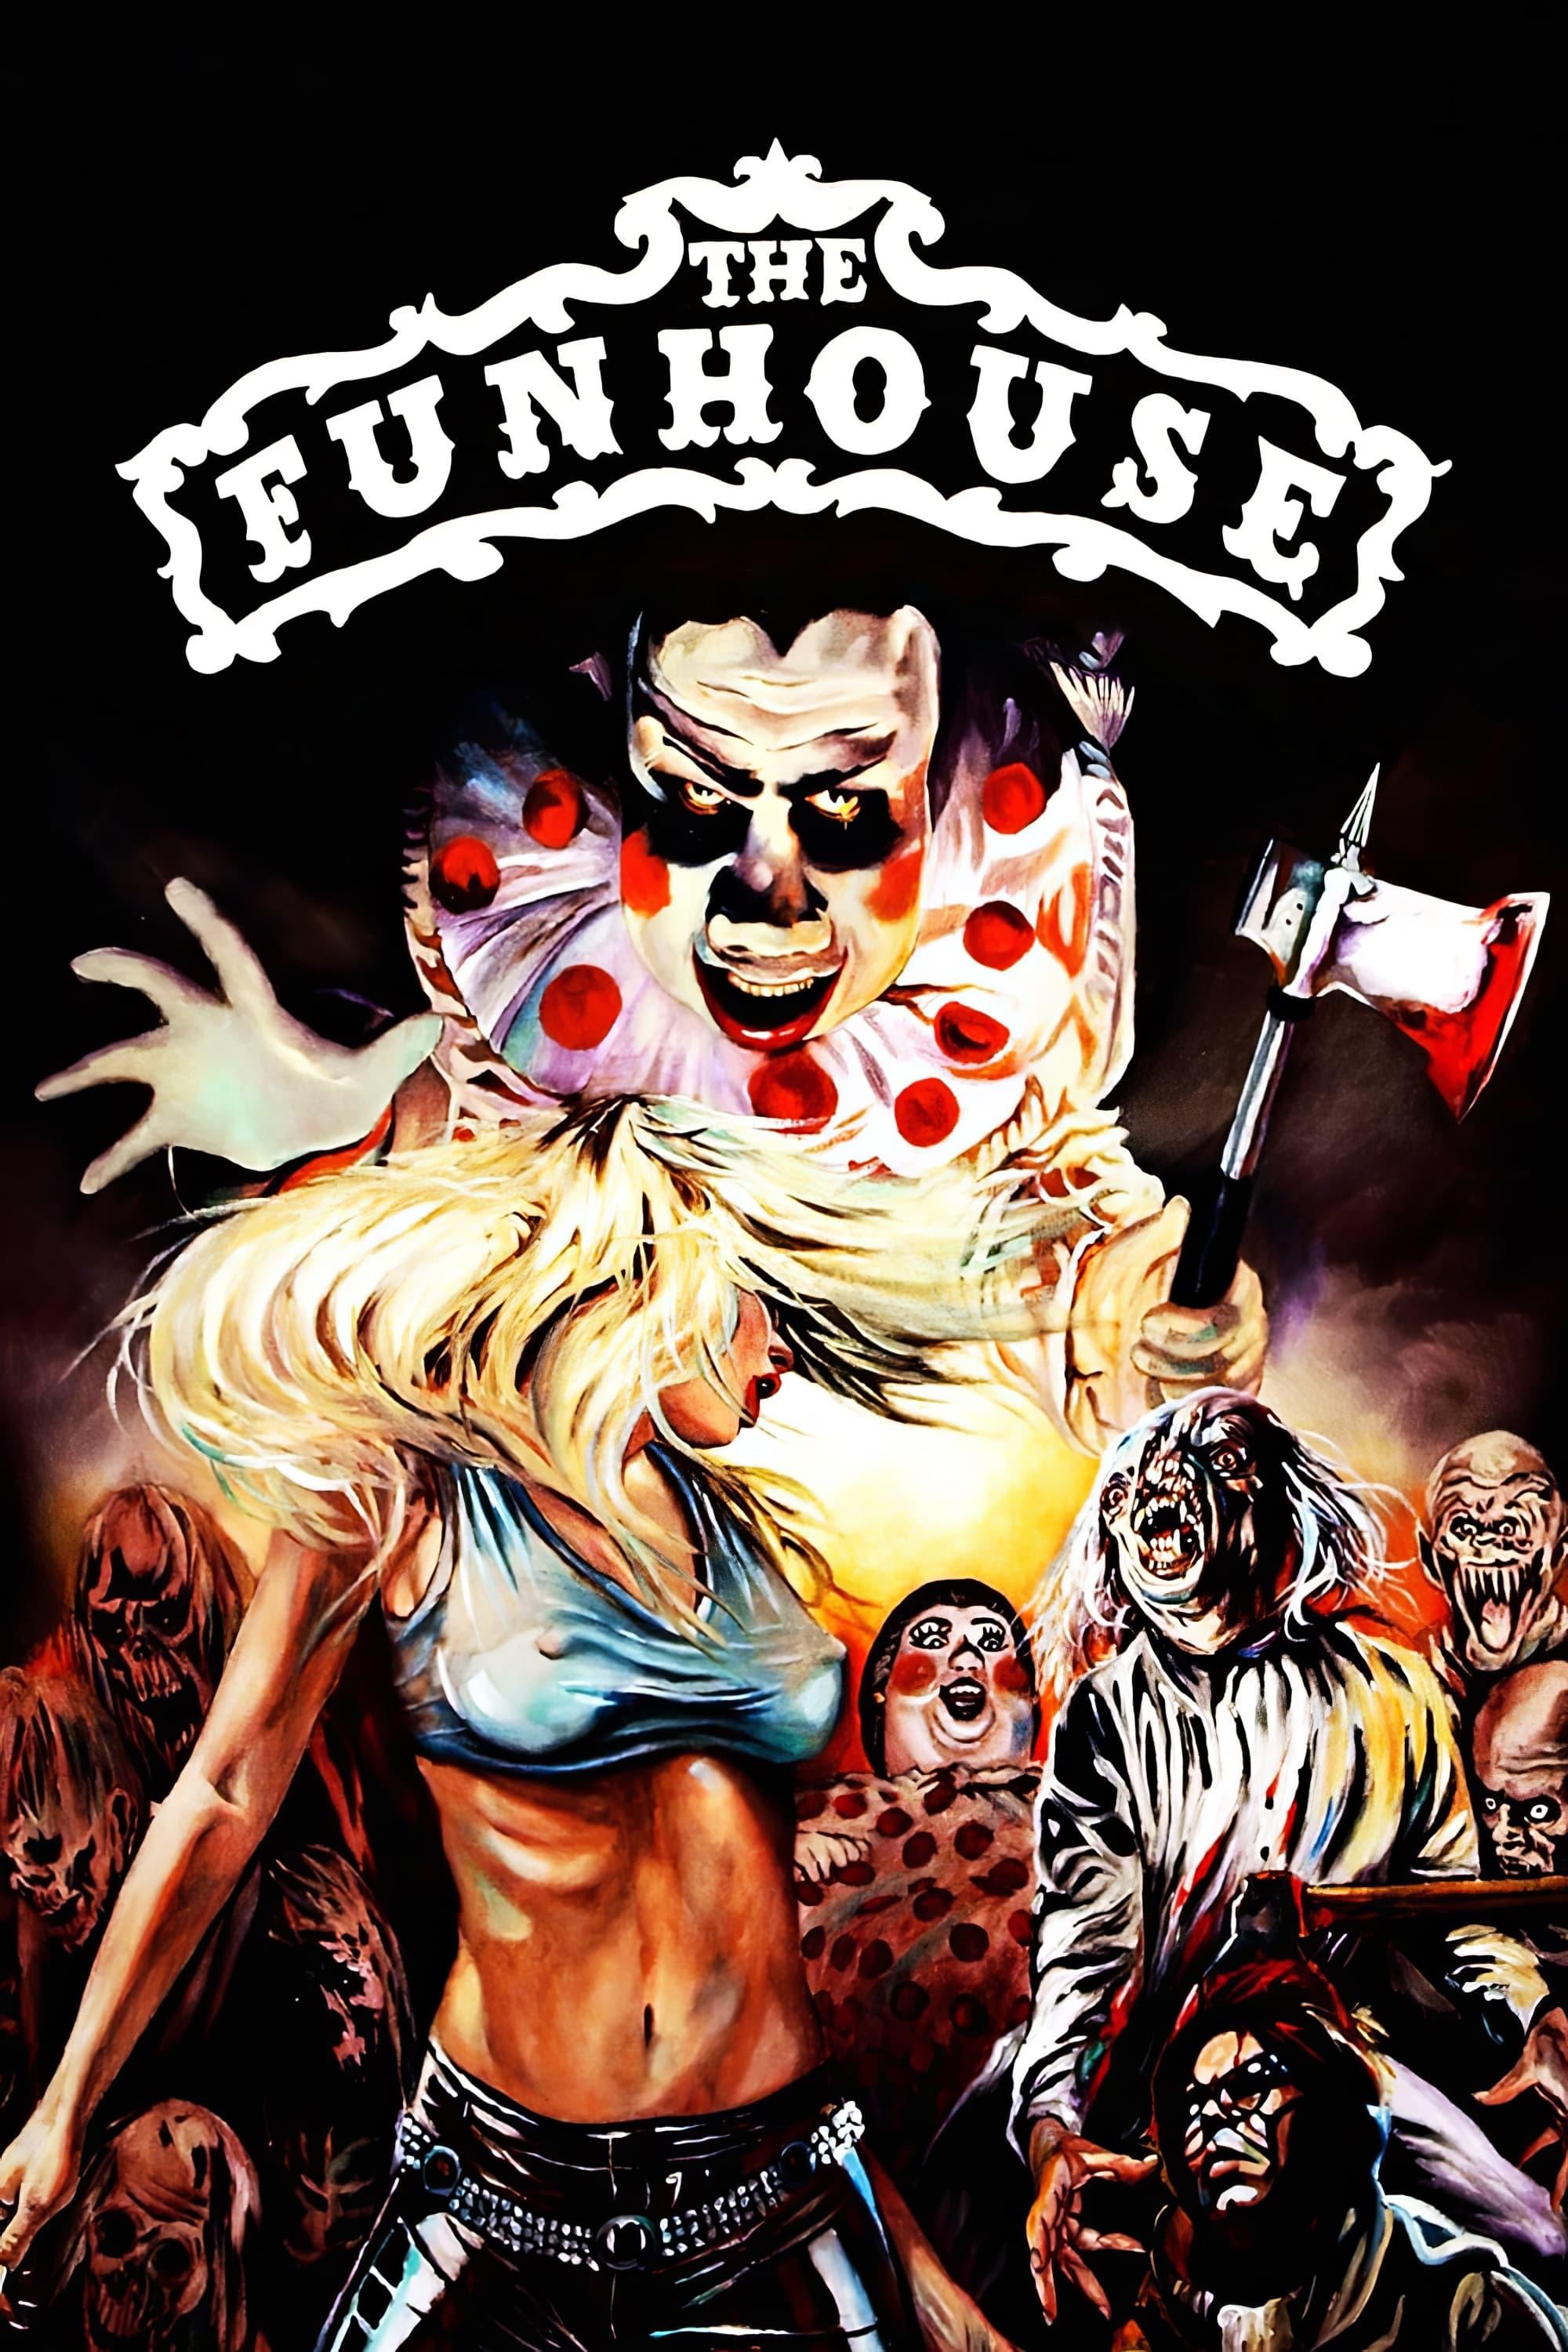 The Funhouse poster